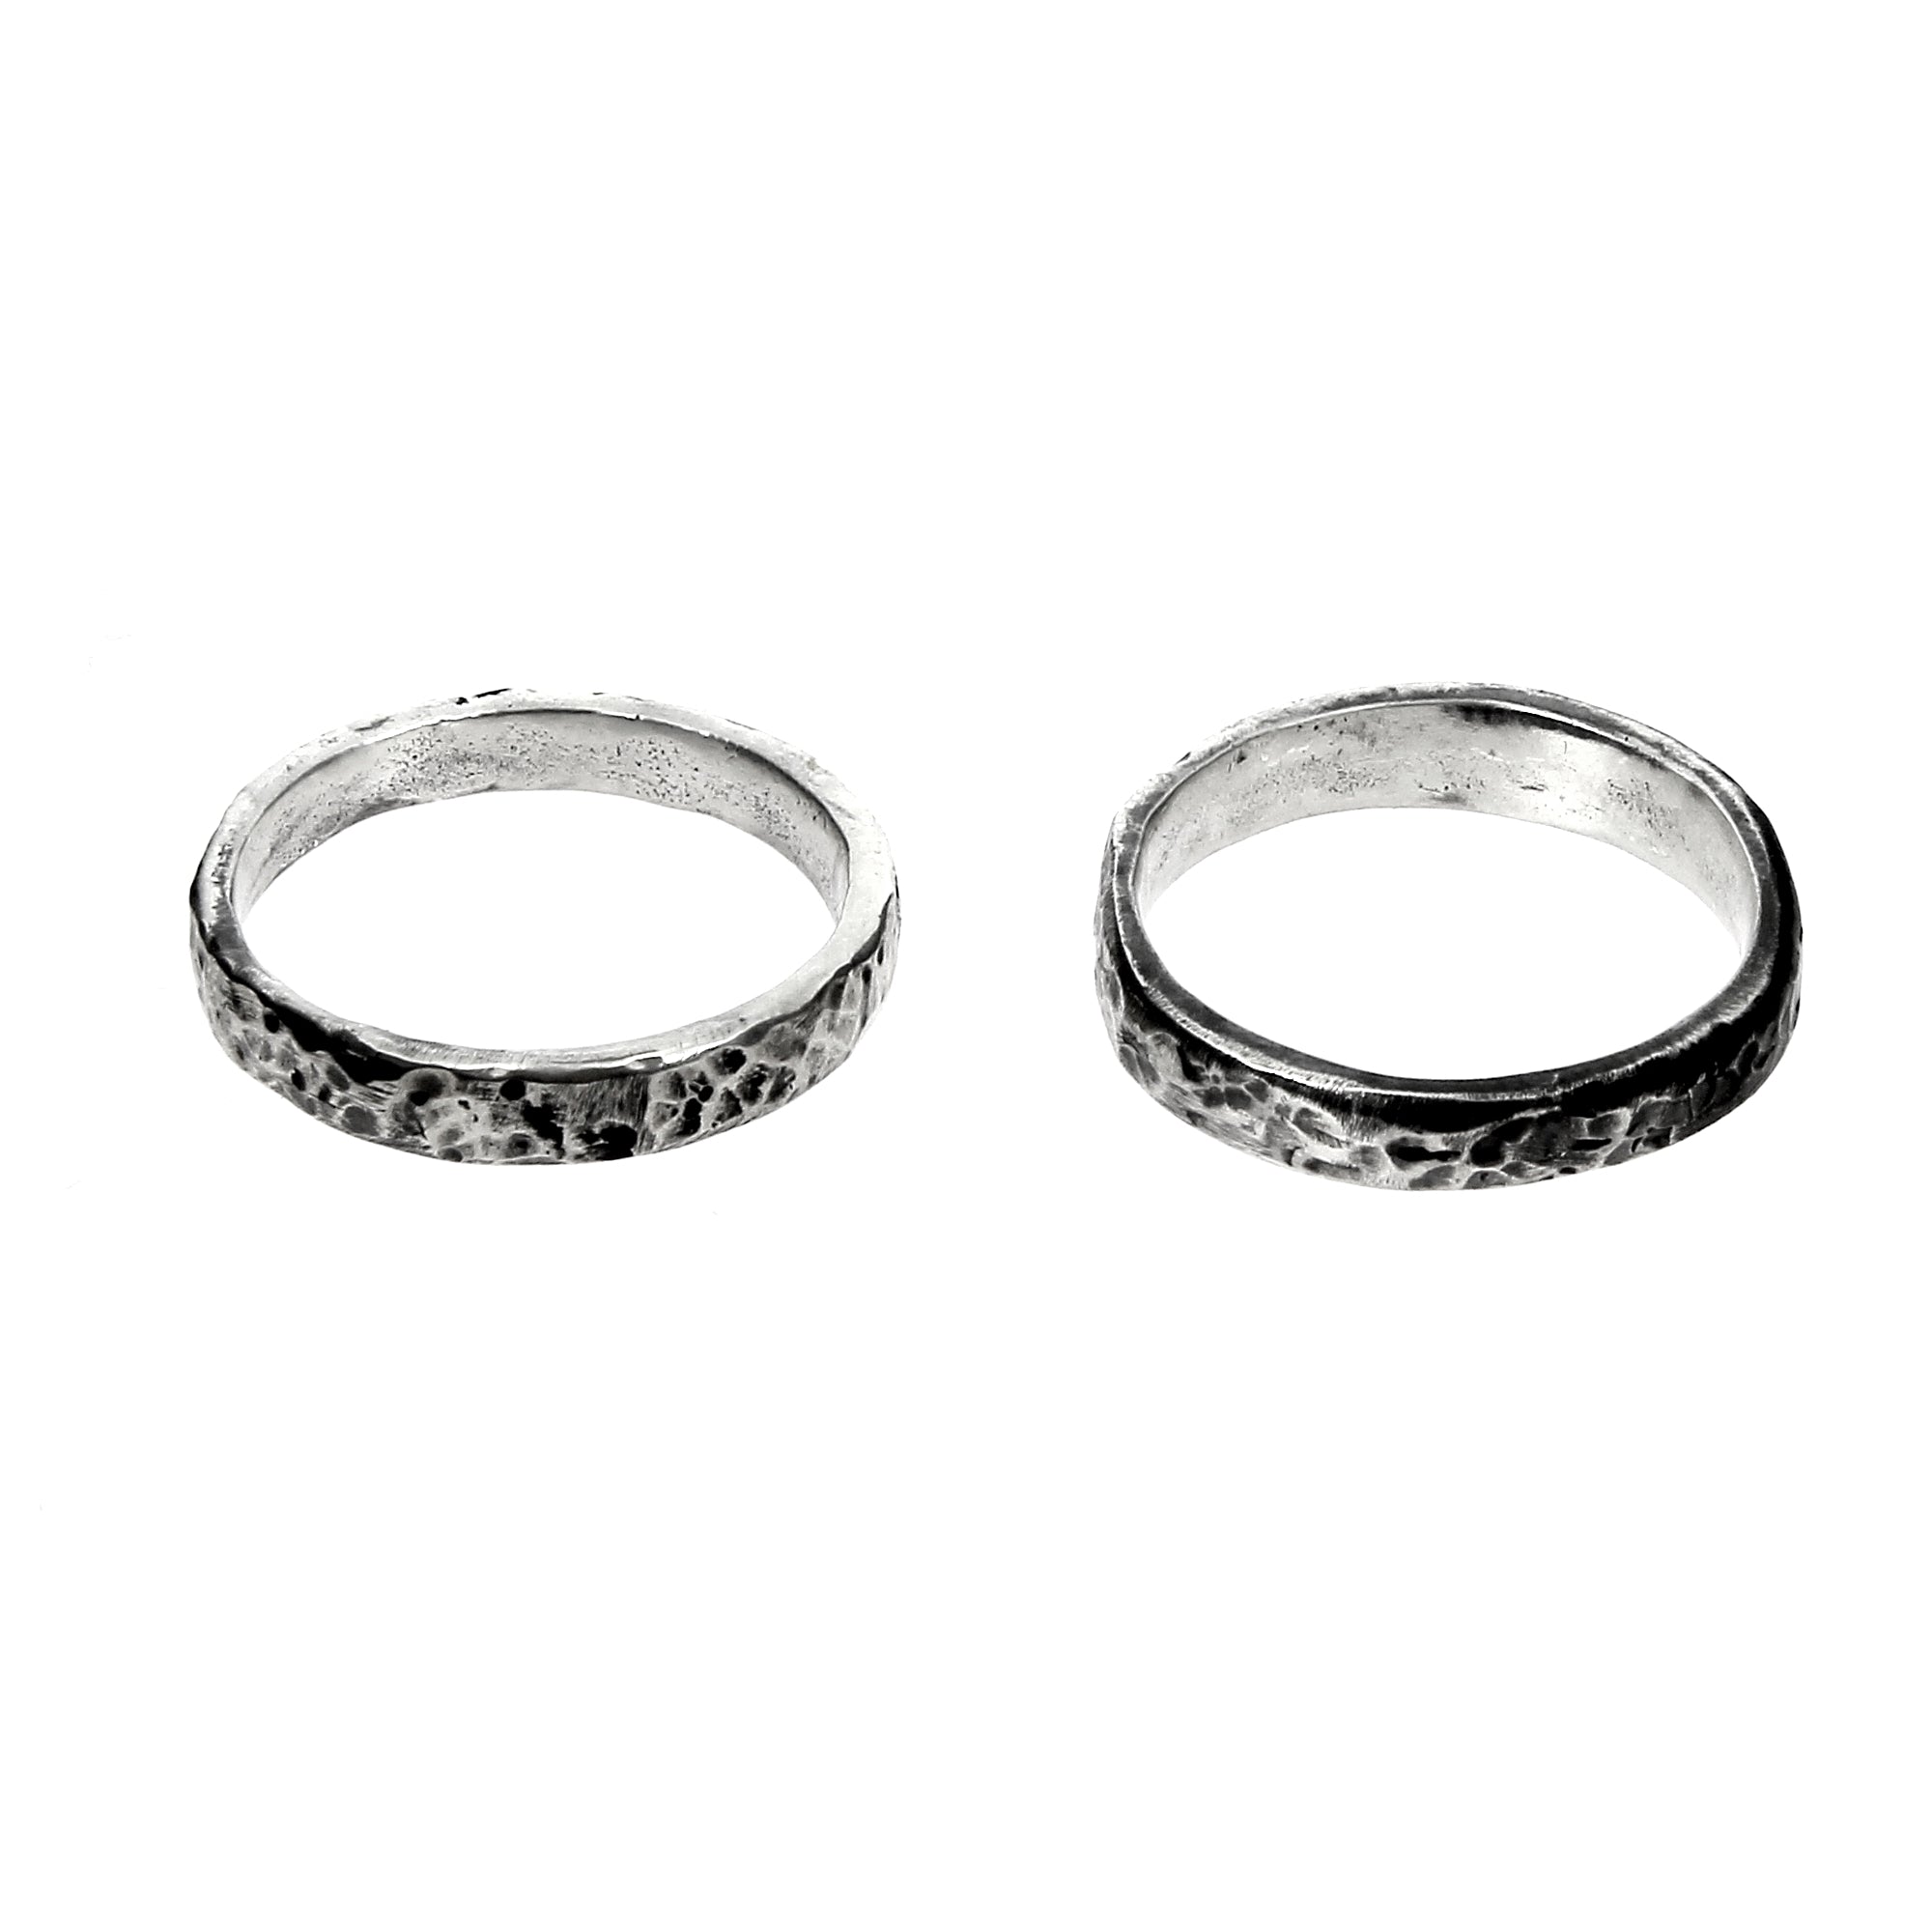 A Pair of Hammered Rings